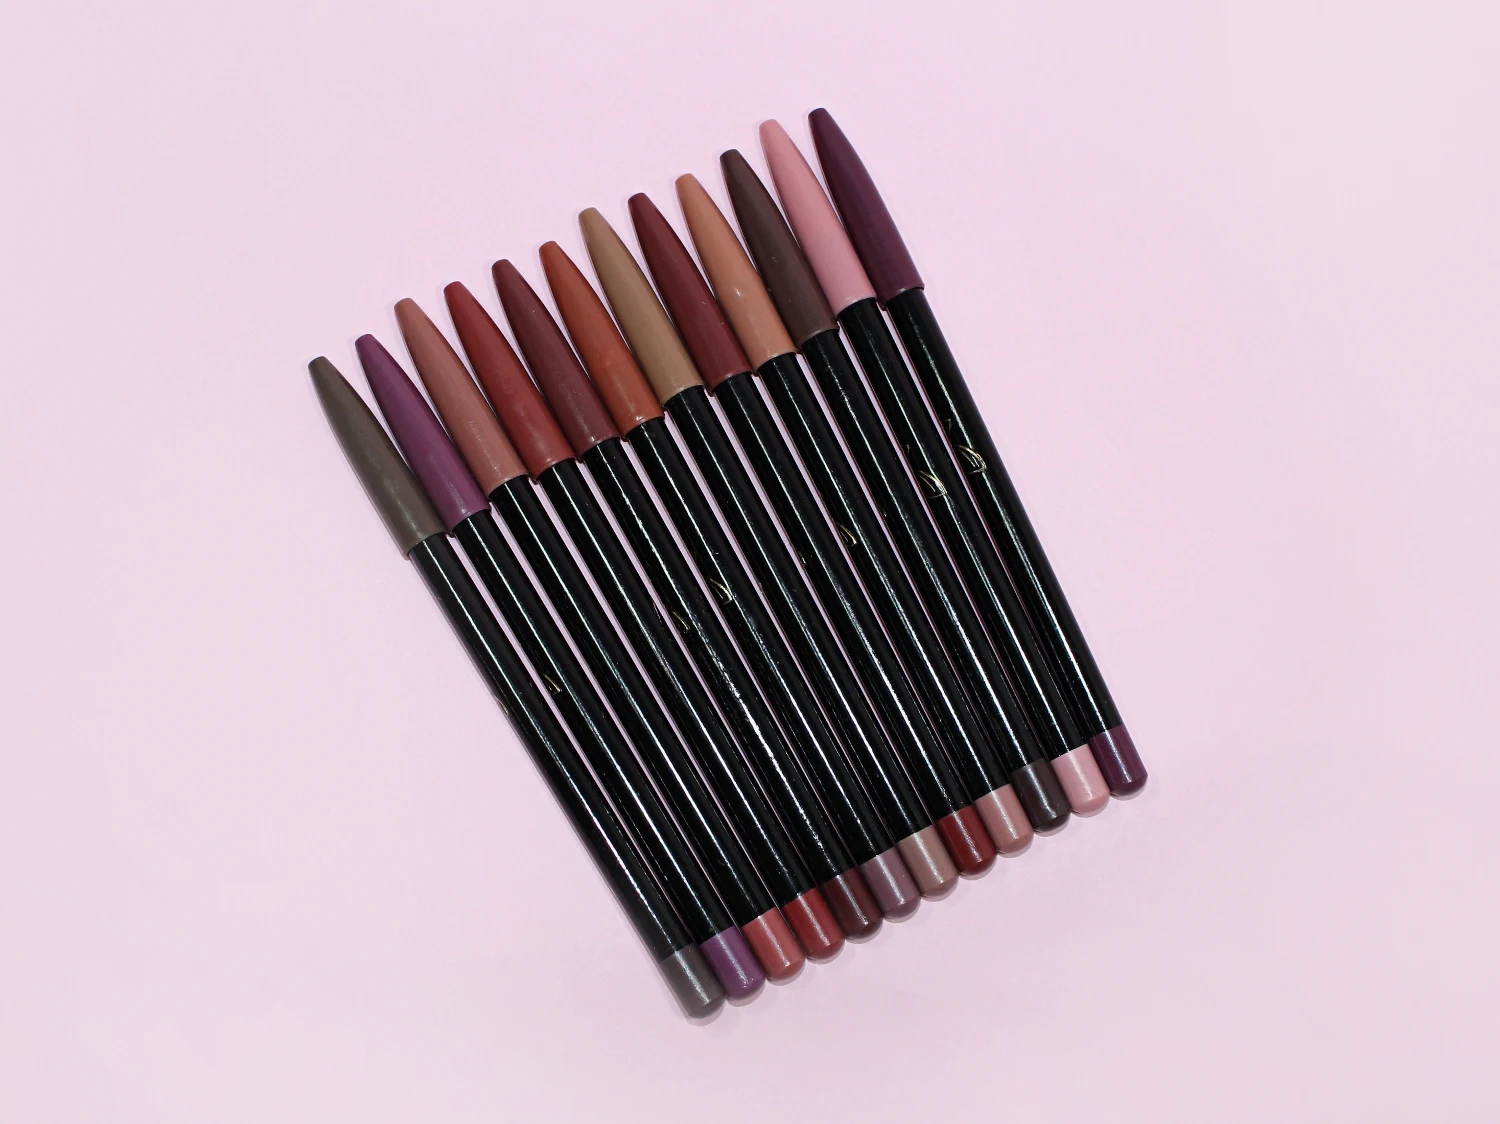 close-up studio picture of nude pencils on a plain rosy background